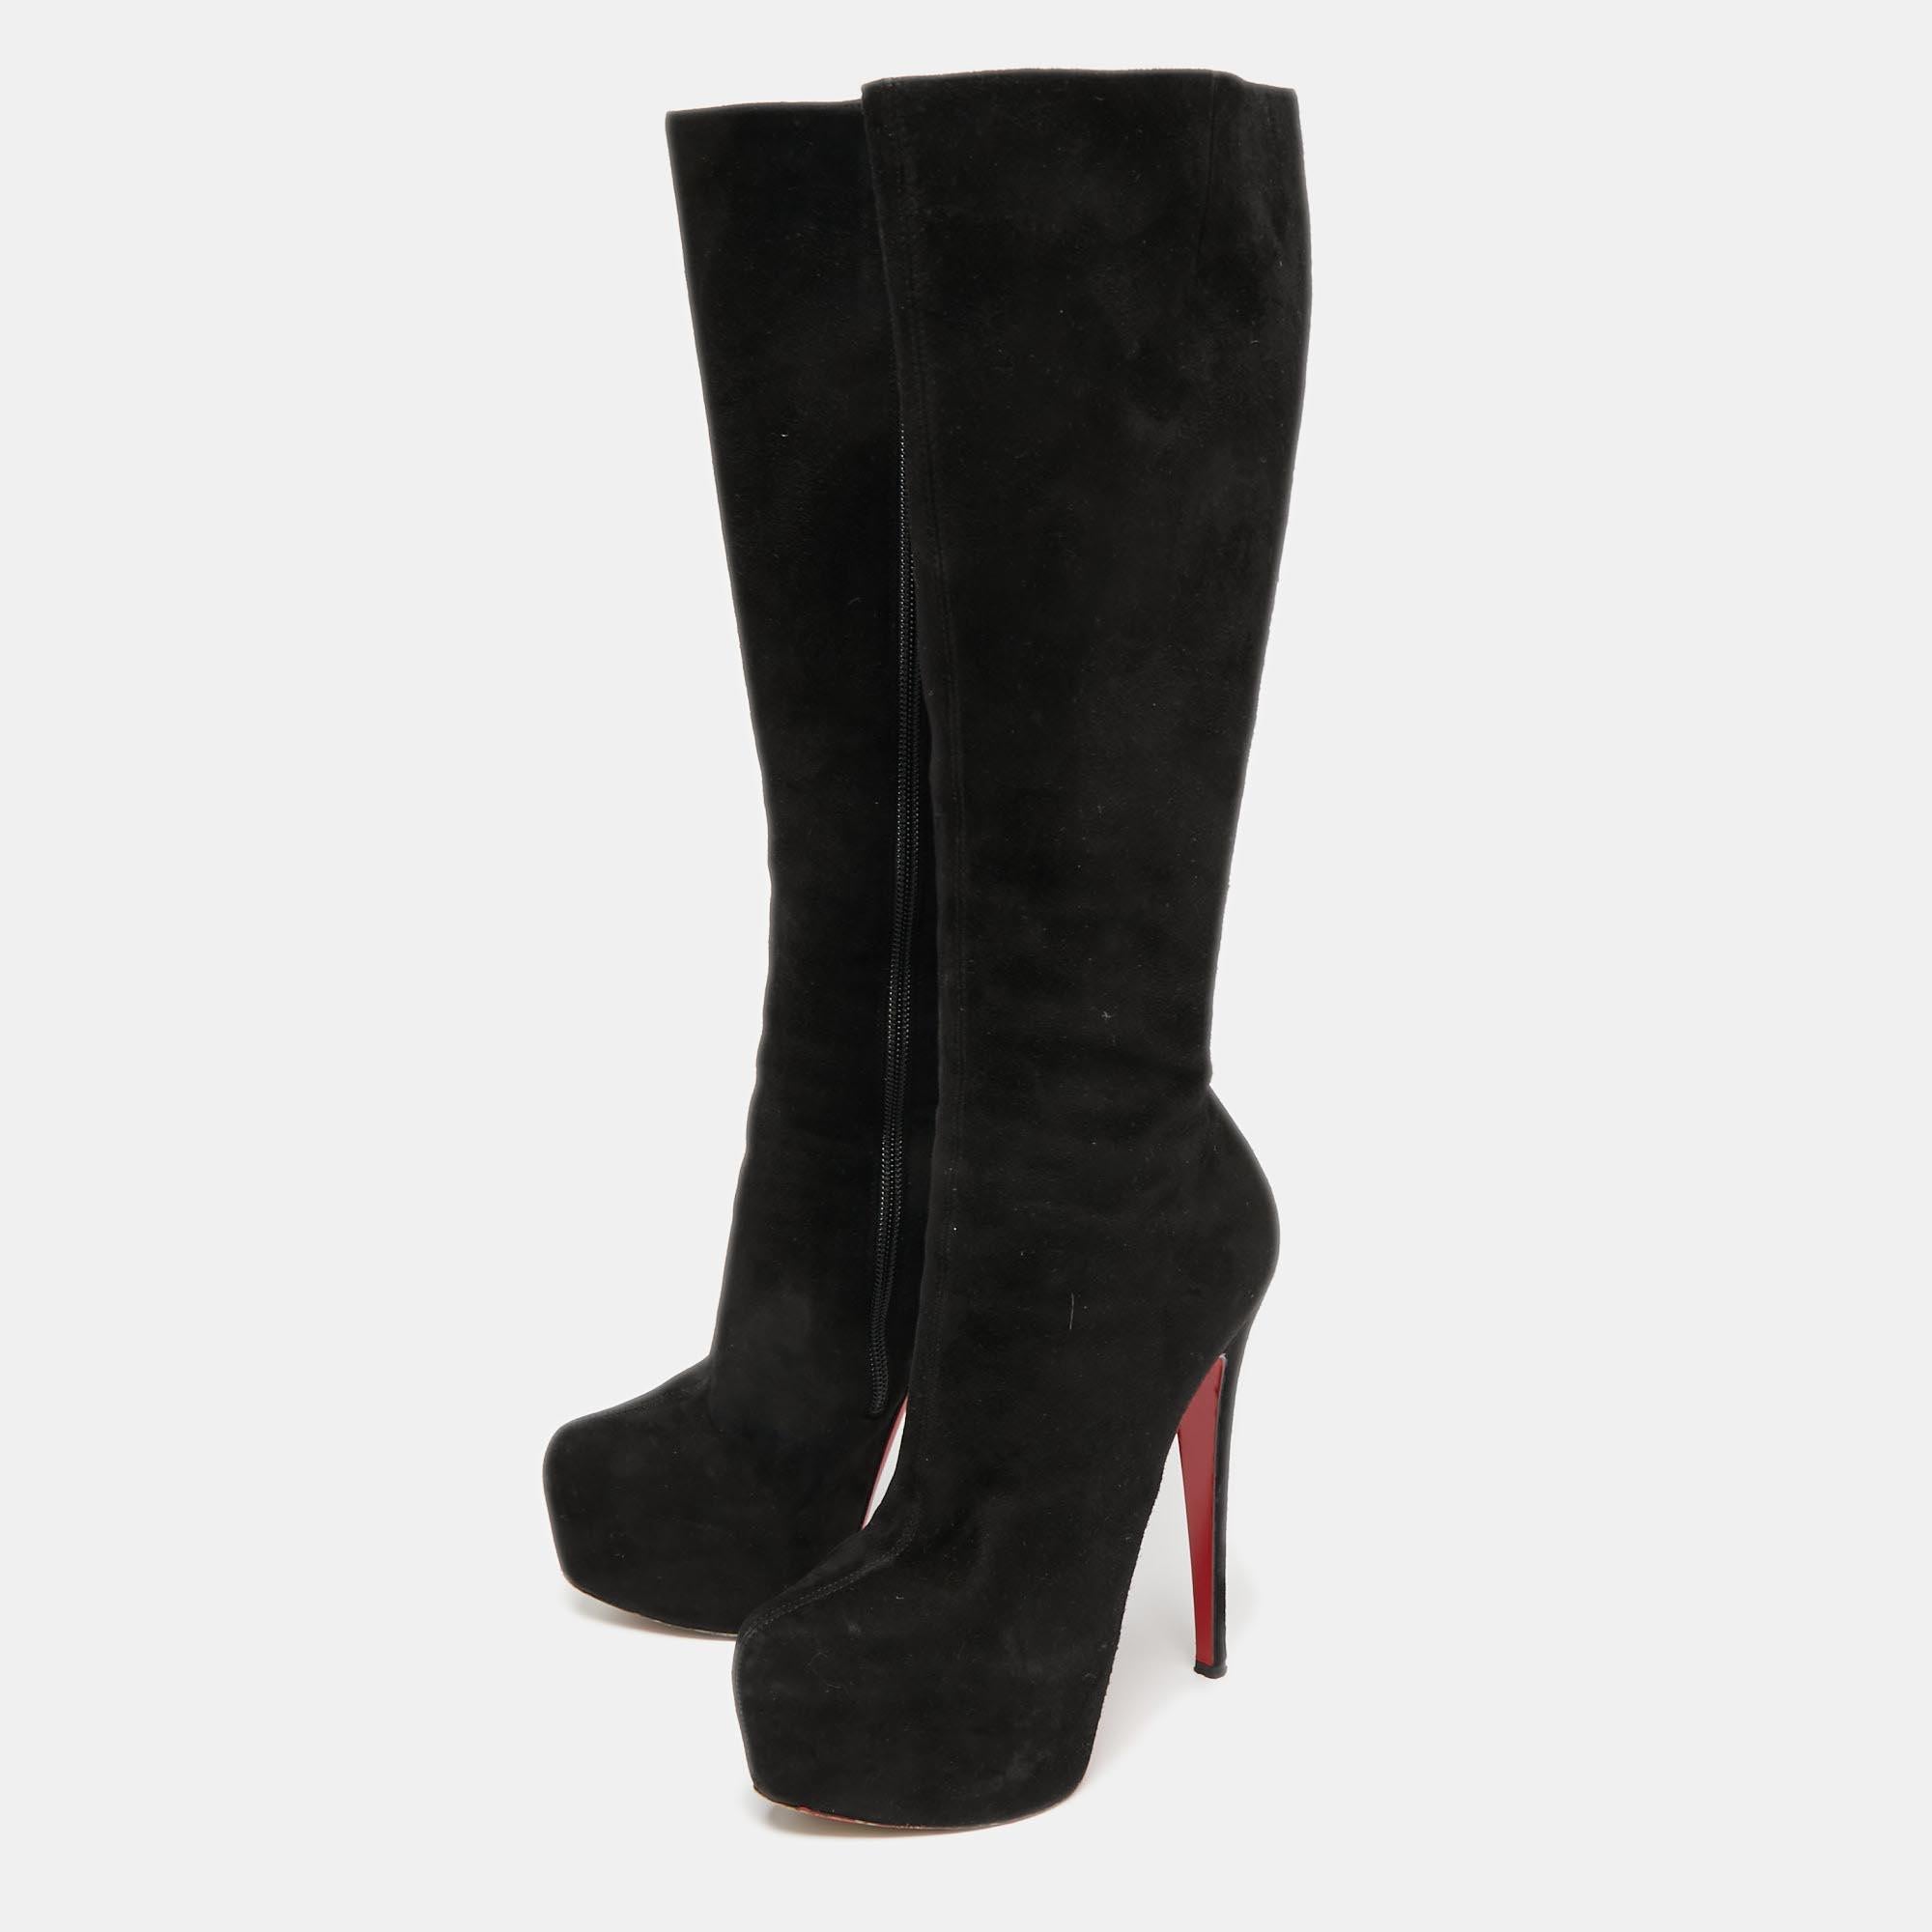 christian louboutin suede boots